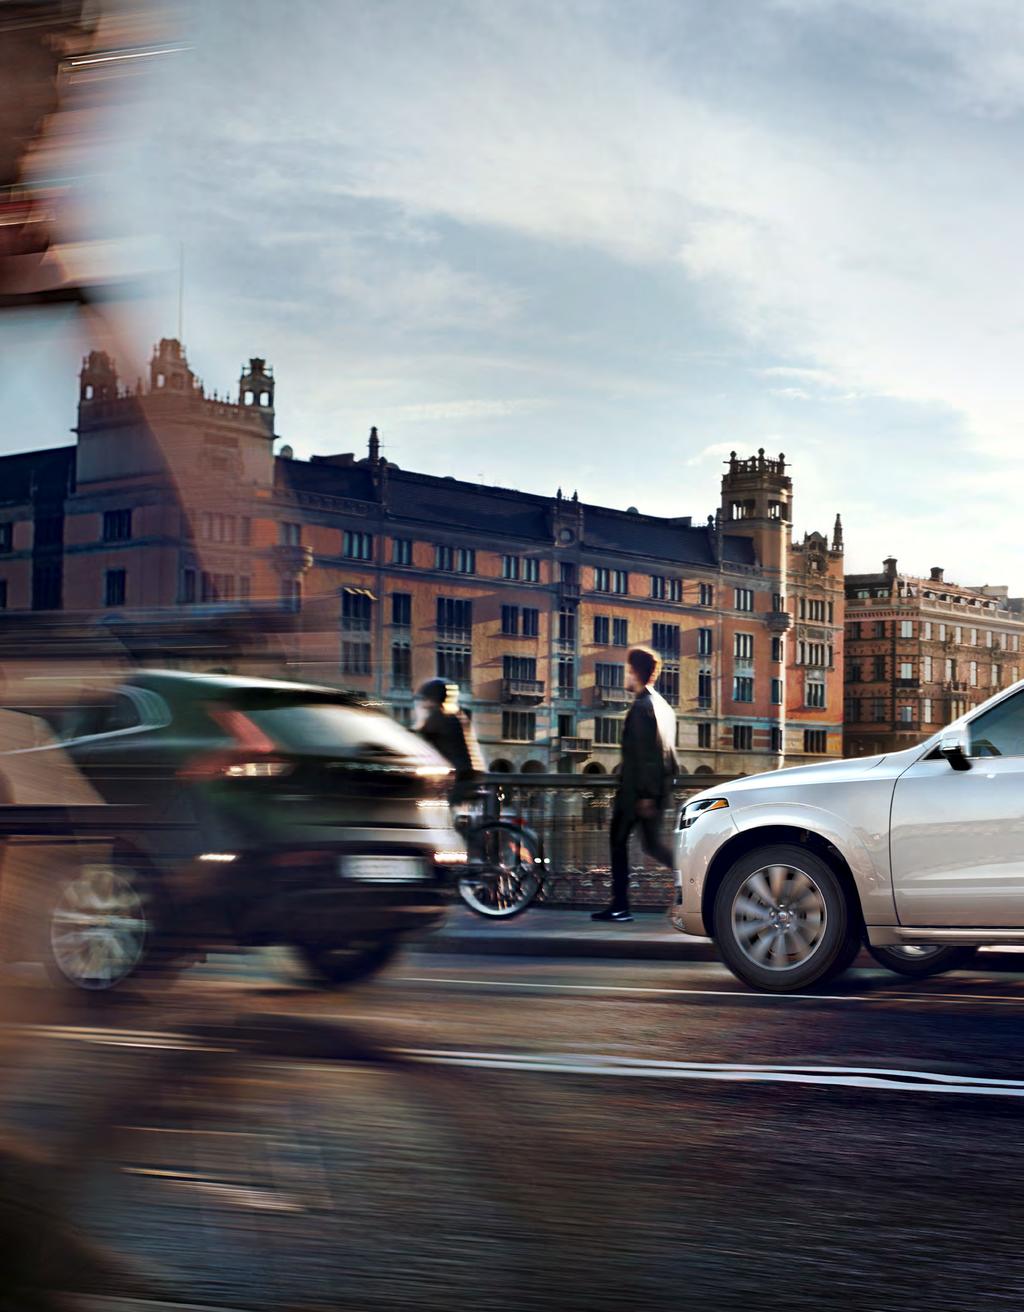 With our new semi-autonomous driving technology Pilot Assist, your Volvo helps make every journey easier and more relaxing.